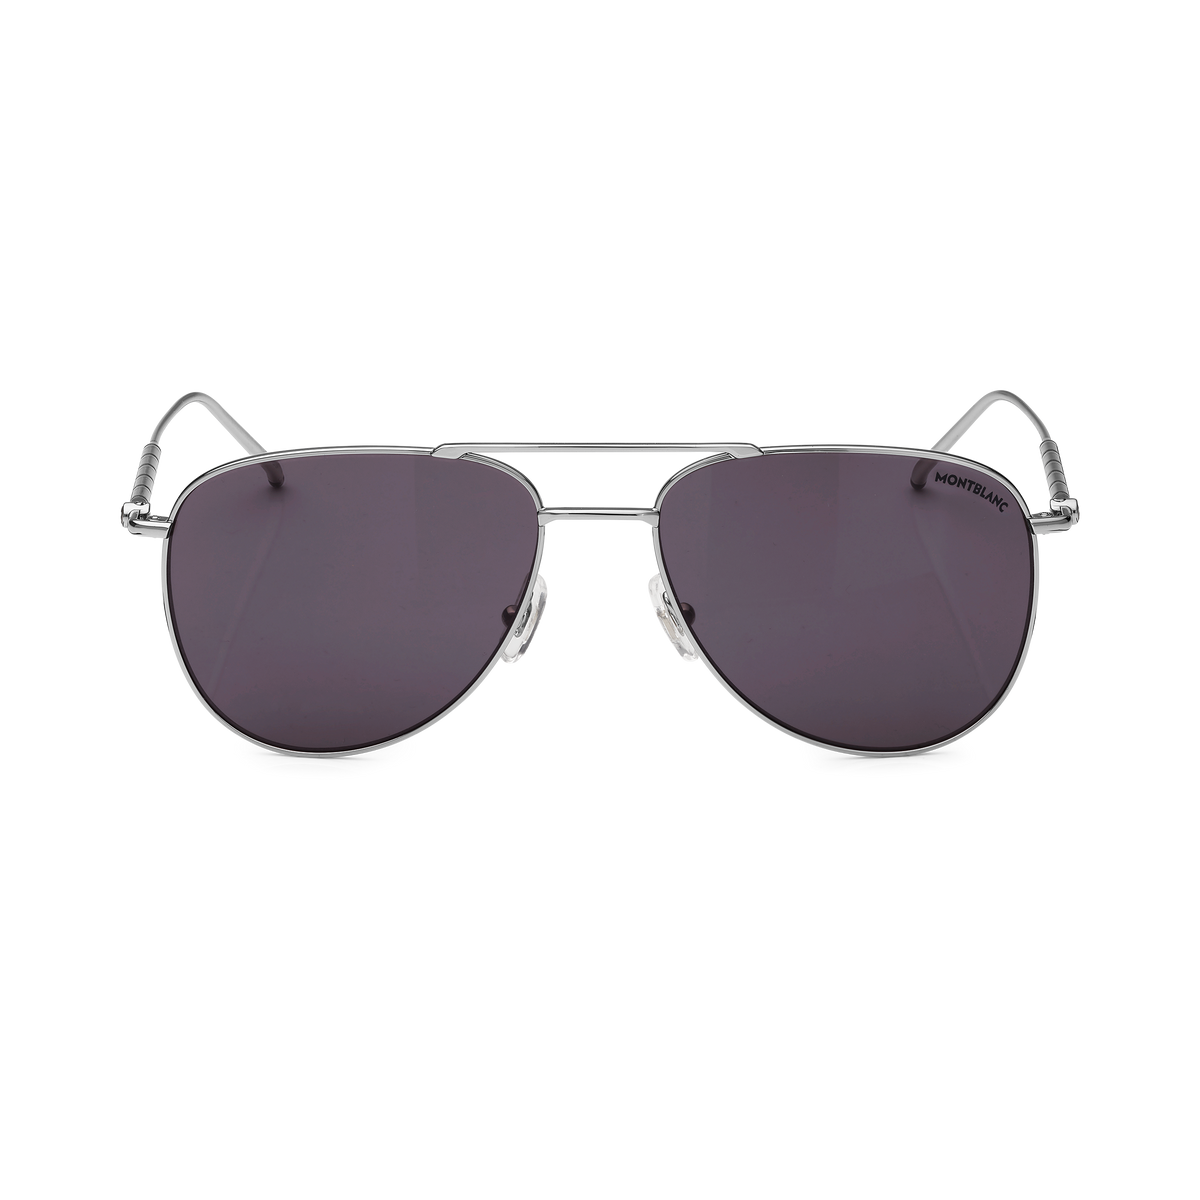 Squared Sunglasses with Silver-Colored Metal Frame